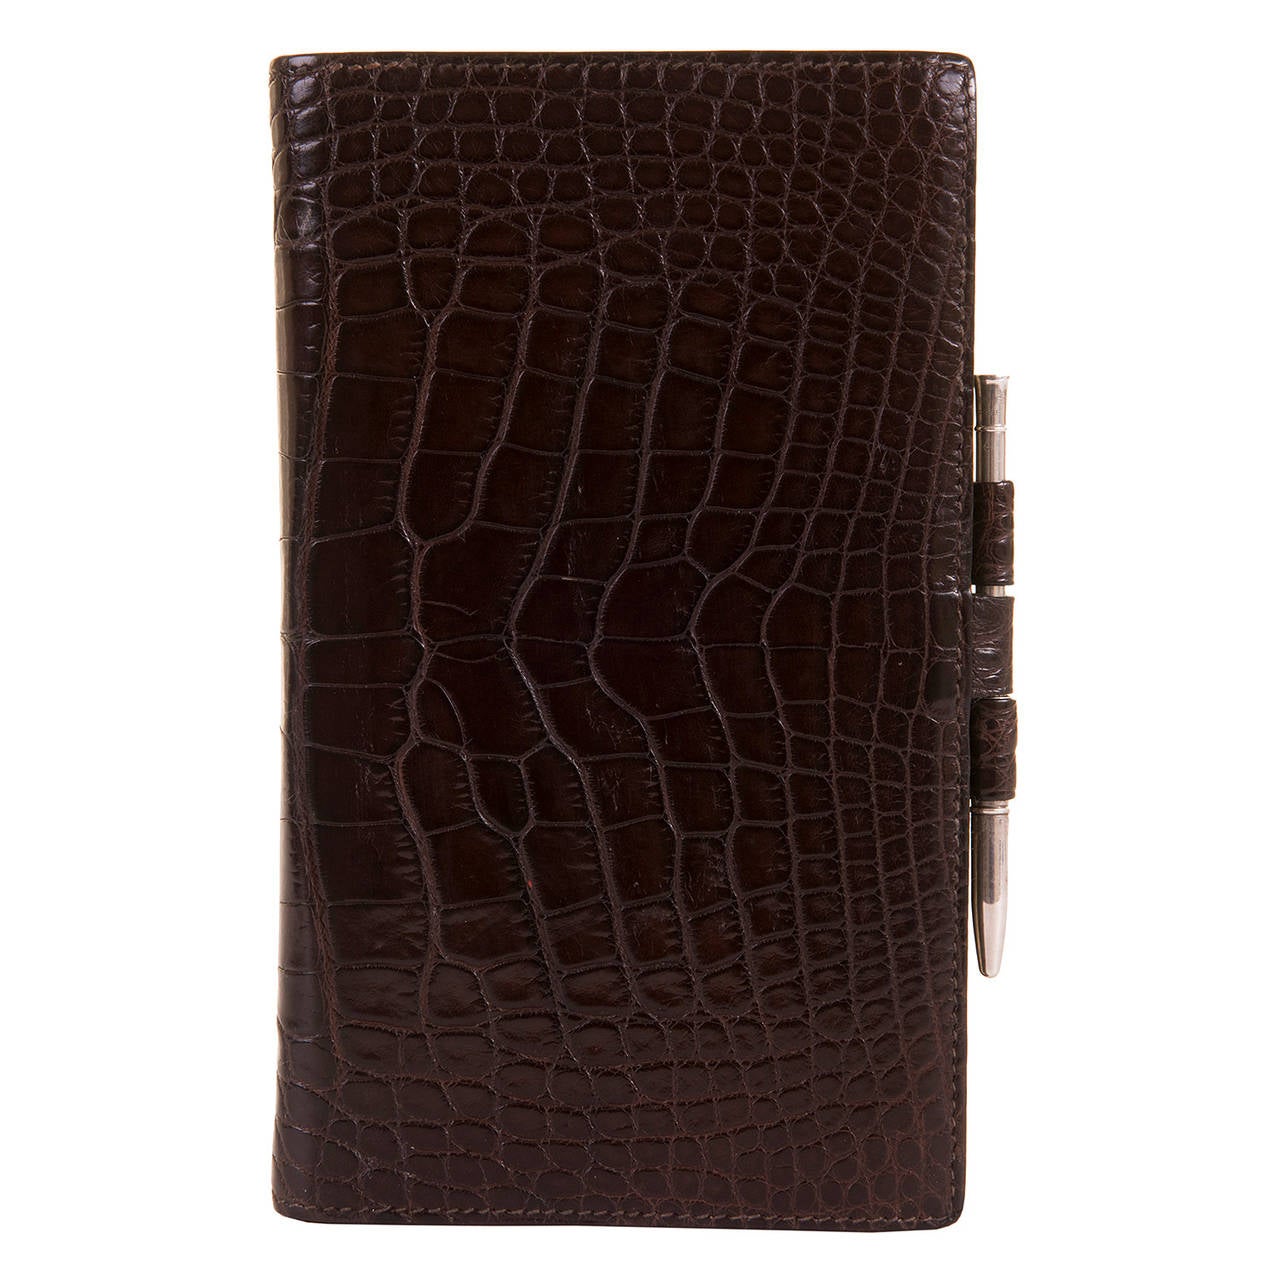 Just spoil yourself, or as a fantastic gift item, this Hermes Chocolate Brown crocodile, 'Notes & Agenda File', still retains it's original Hermes silver pencil (signed) together with it's unused lined paper files. The File appears unused and is in